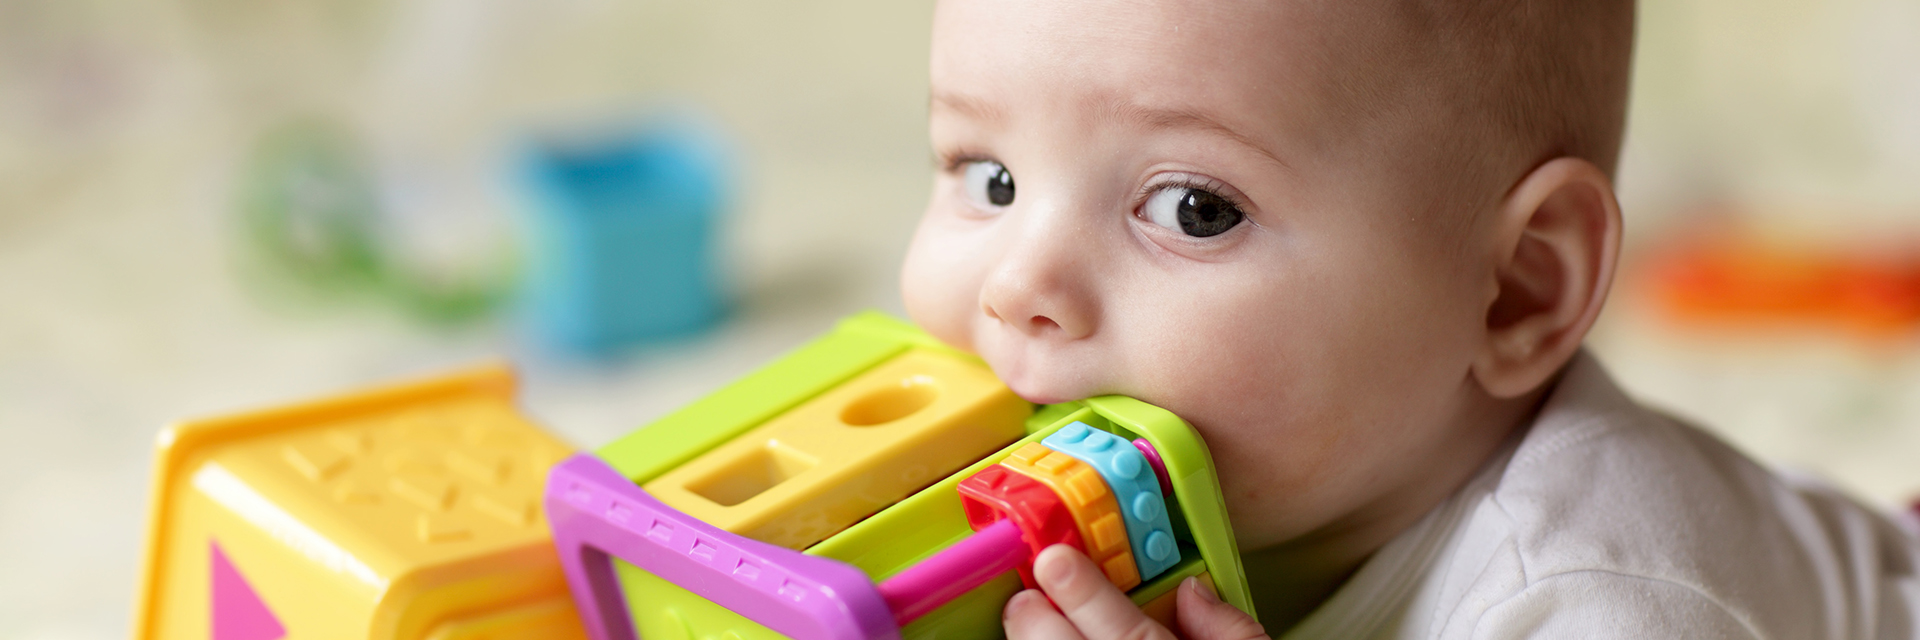 Baby playing with toy in mouth